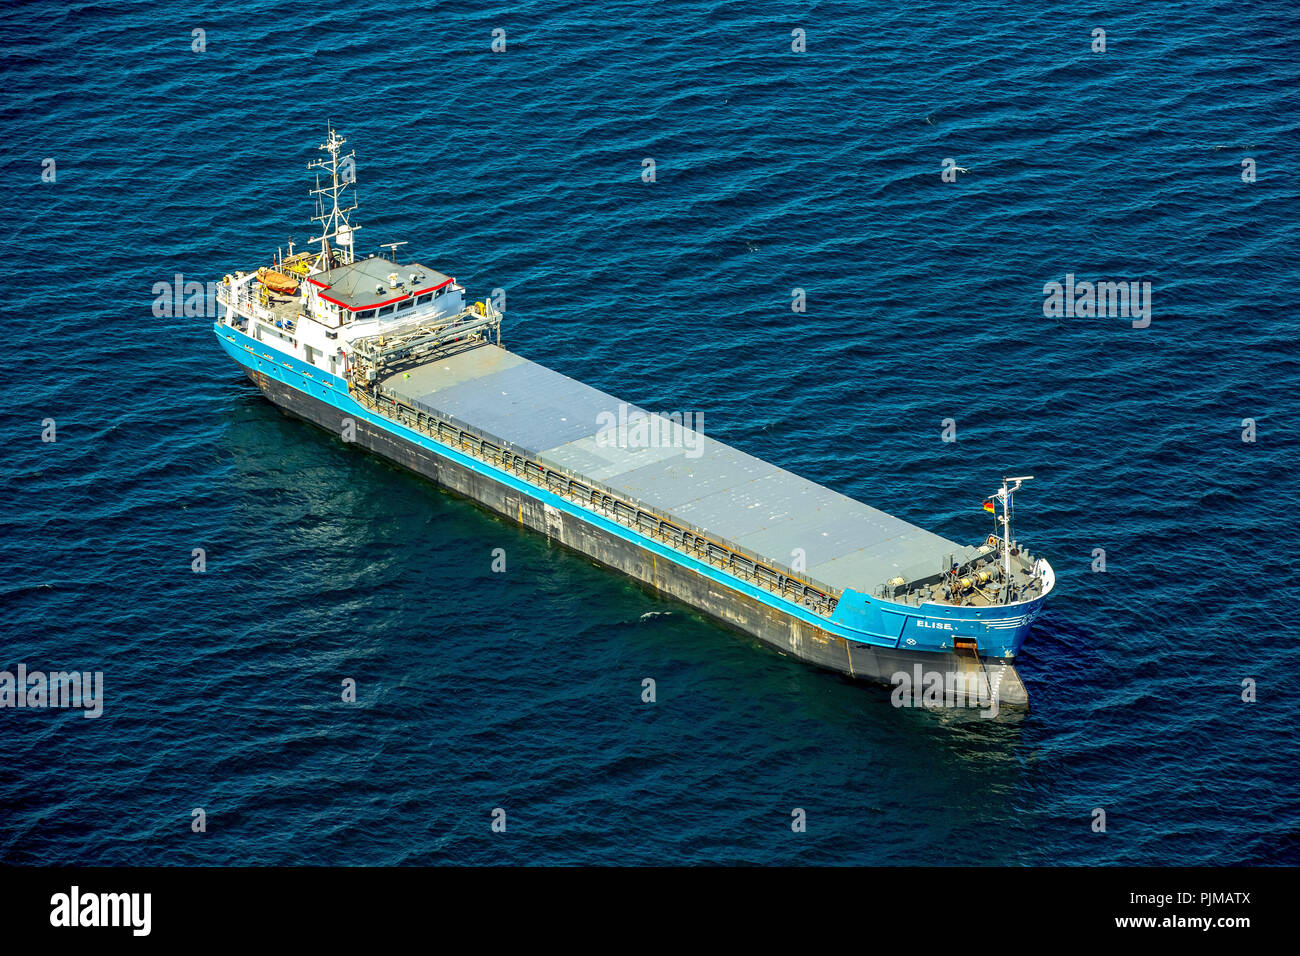 Cargo ship Elise lying in the roads in the Bay of Lübeck, Baltic Sea, Bay of Lübeck, Hanseatic city, Germany Stock Photo